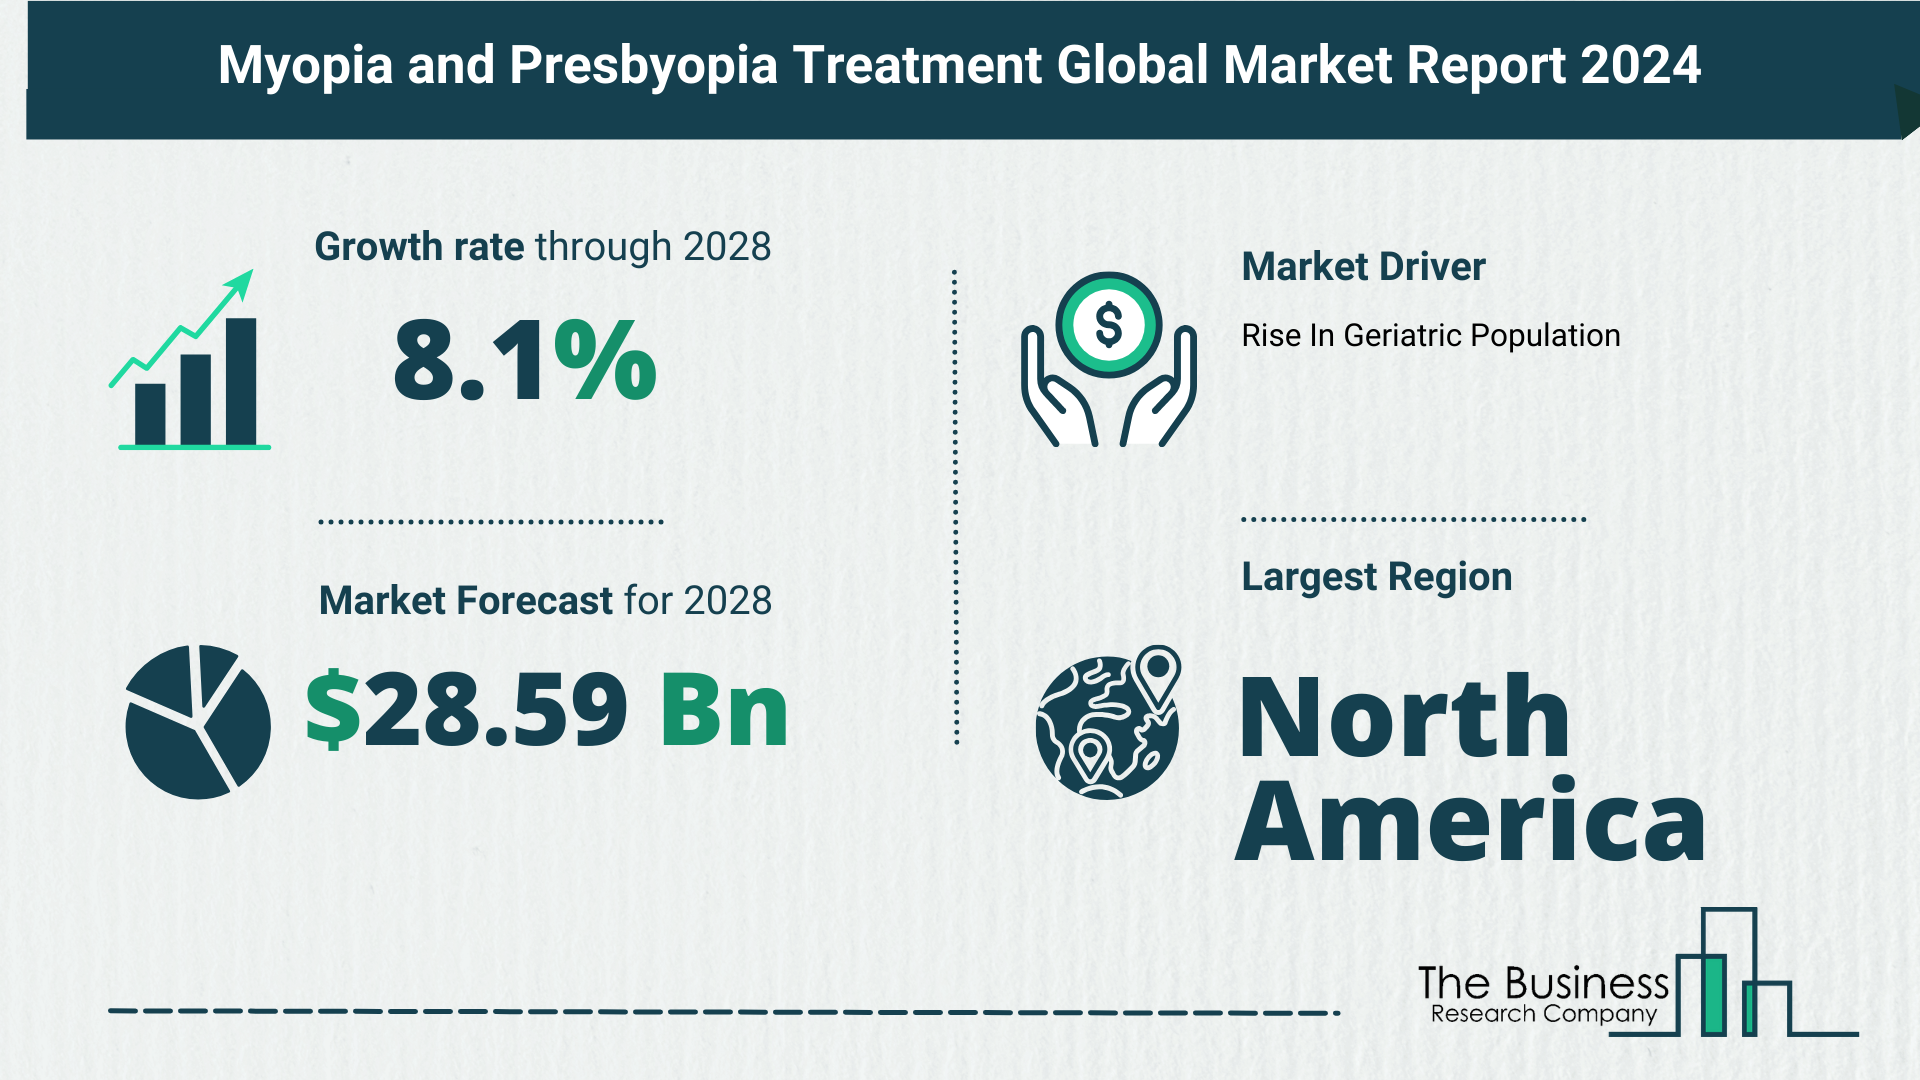 Key Trends And Drivers In The Myopia and Presbyopia Treatment Market 2024